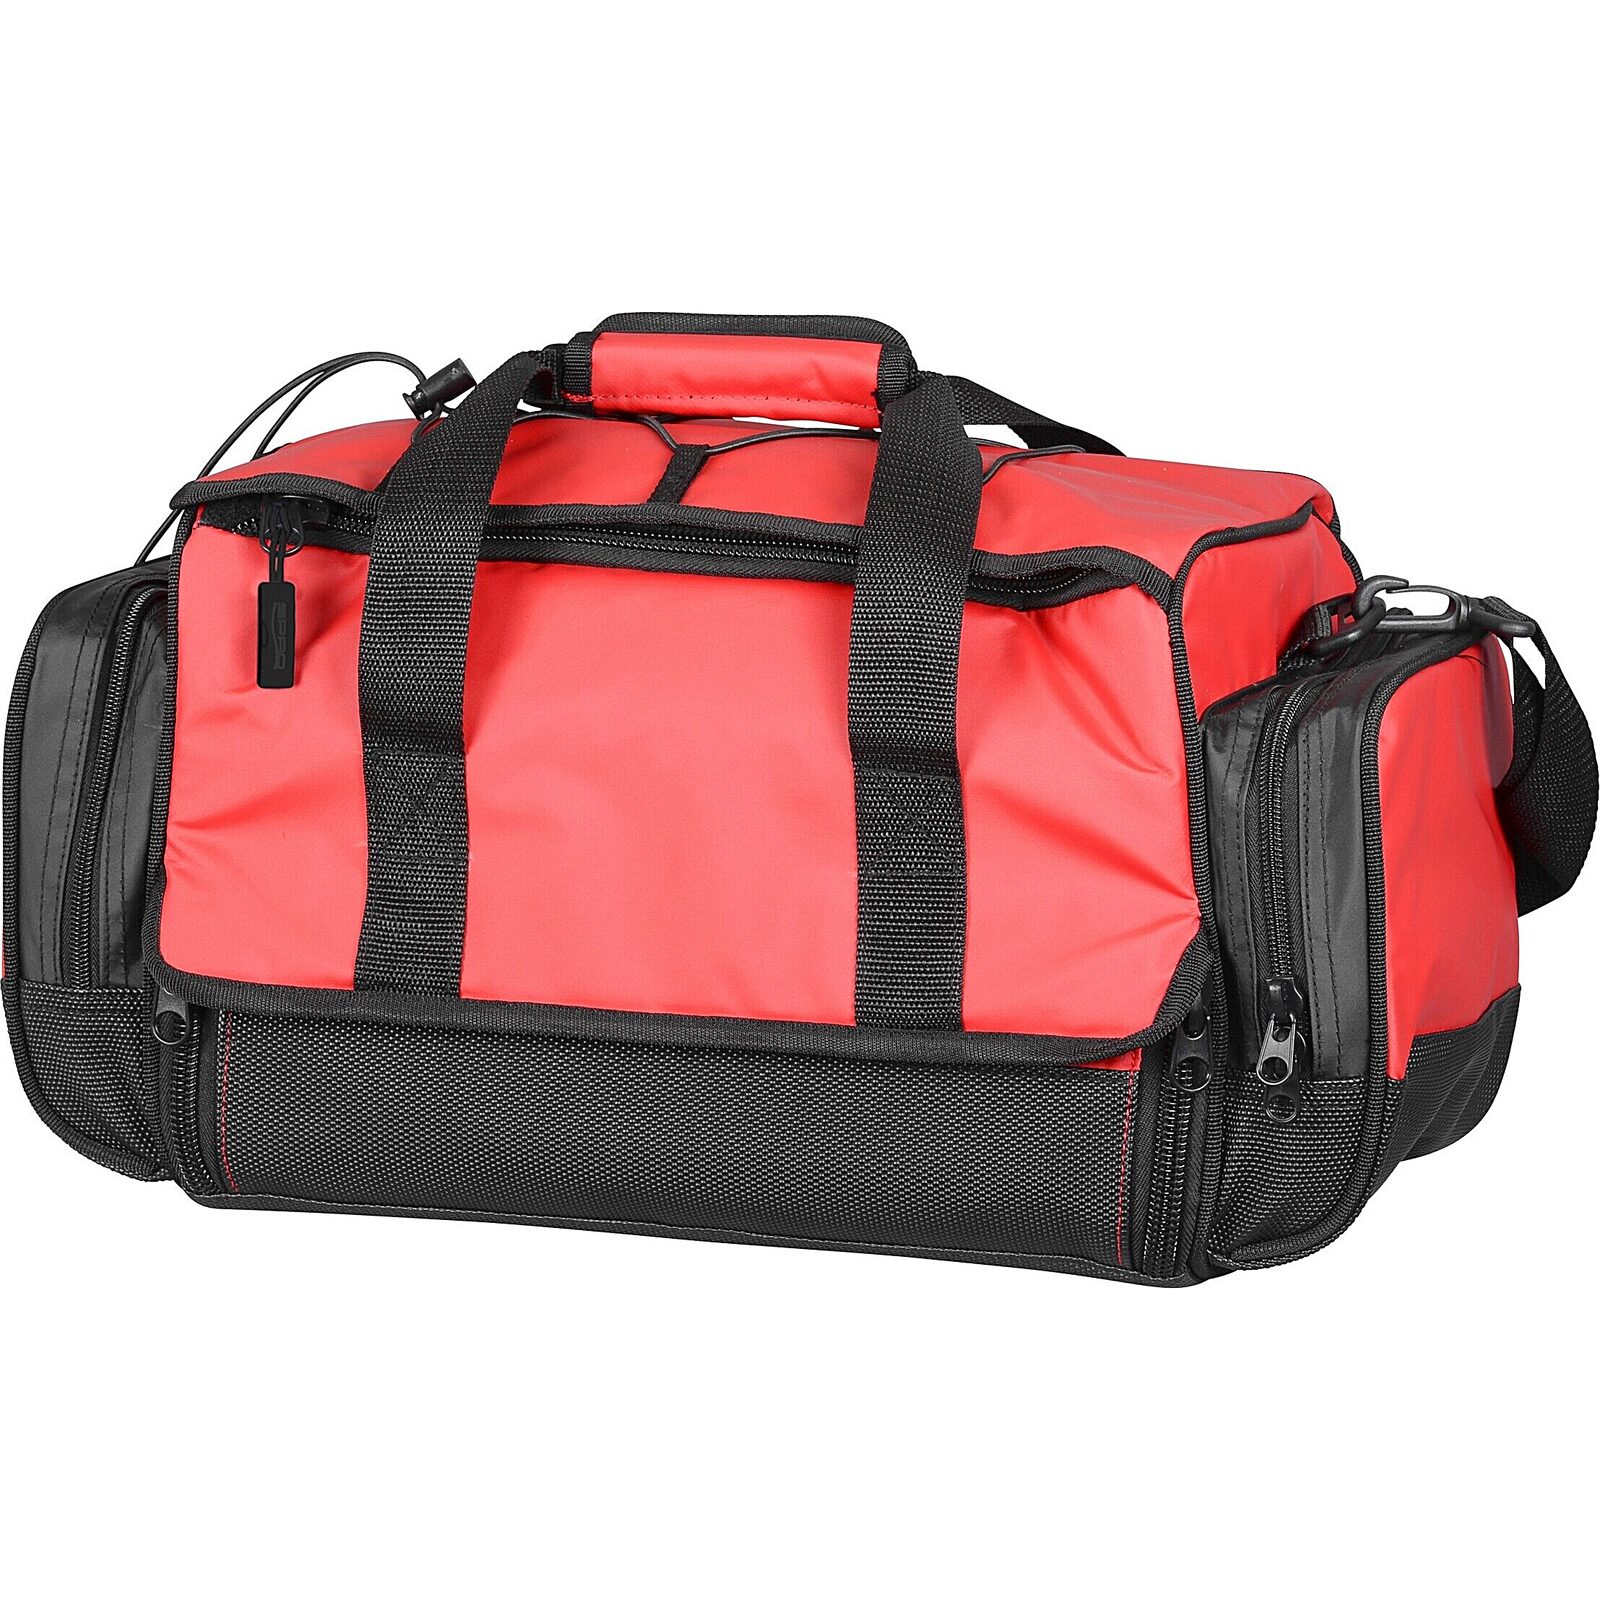 https://www.tackleshop.nl/products/Norway-Expedition-HD-Tackle-Bag-36411.jpg